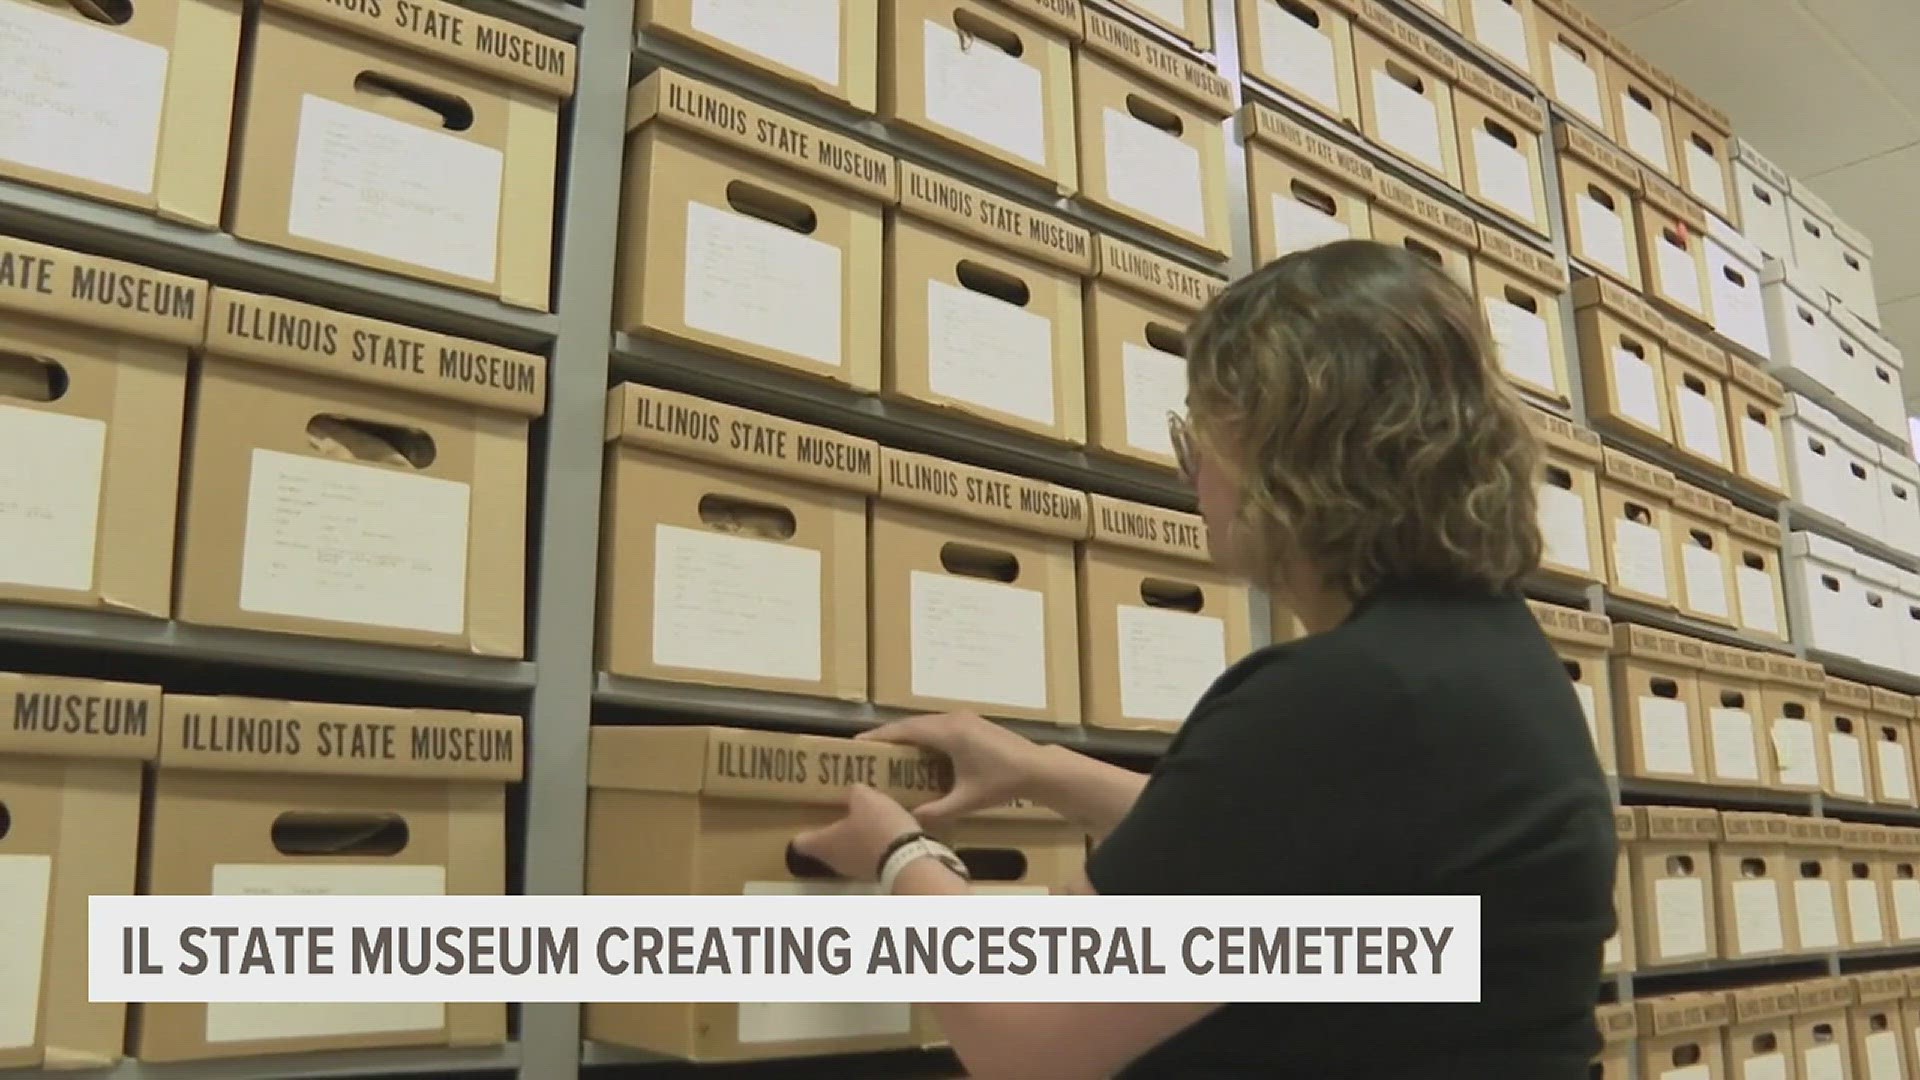 The Human Remains Protections Act speeds up the process for returning Native American artifacts to the community.